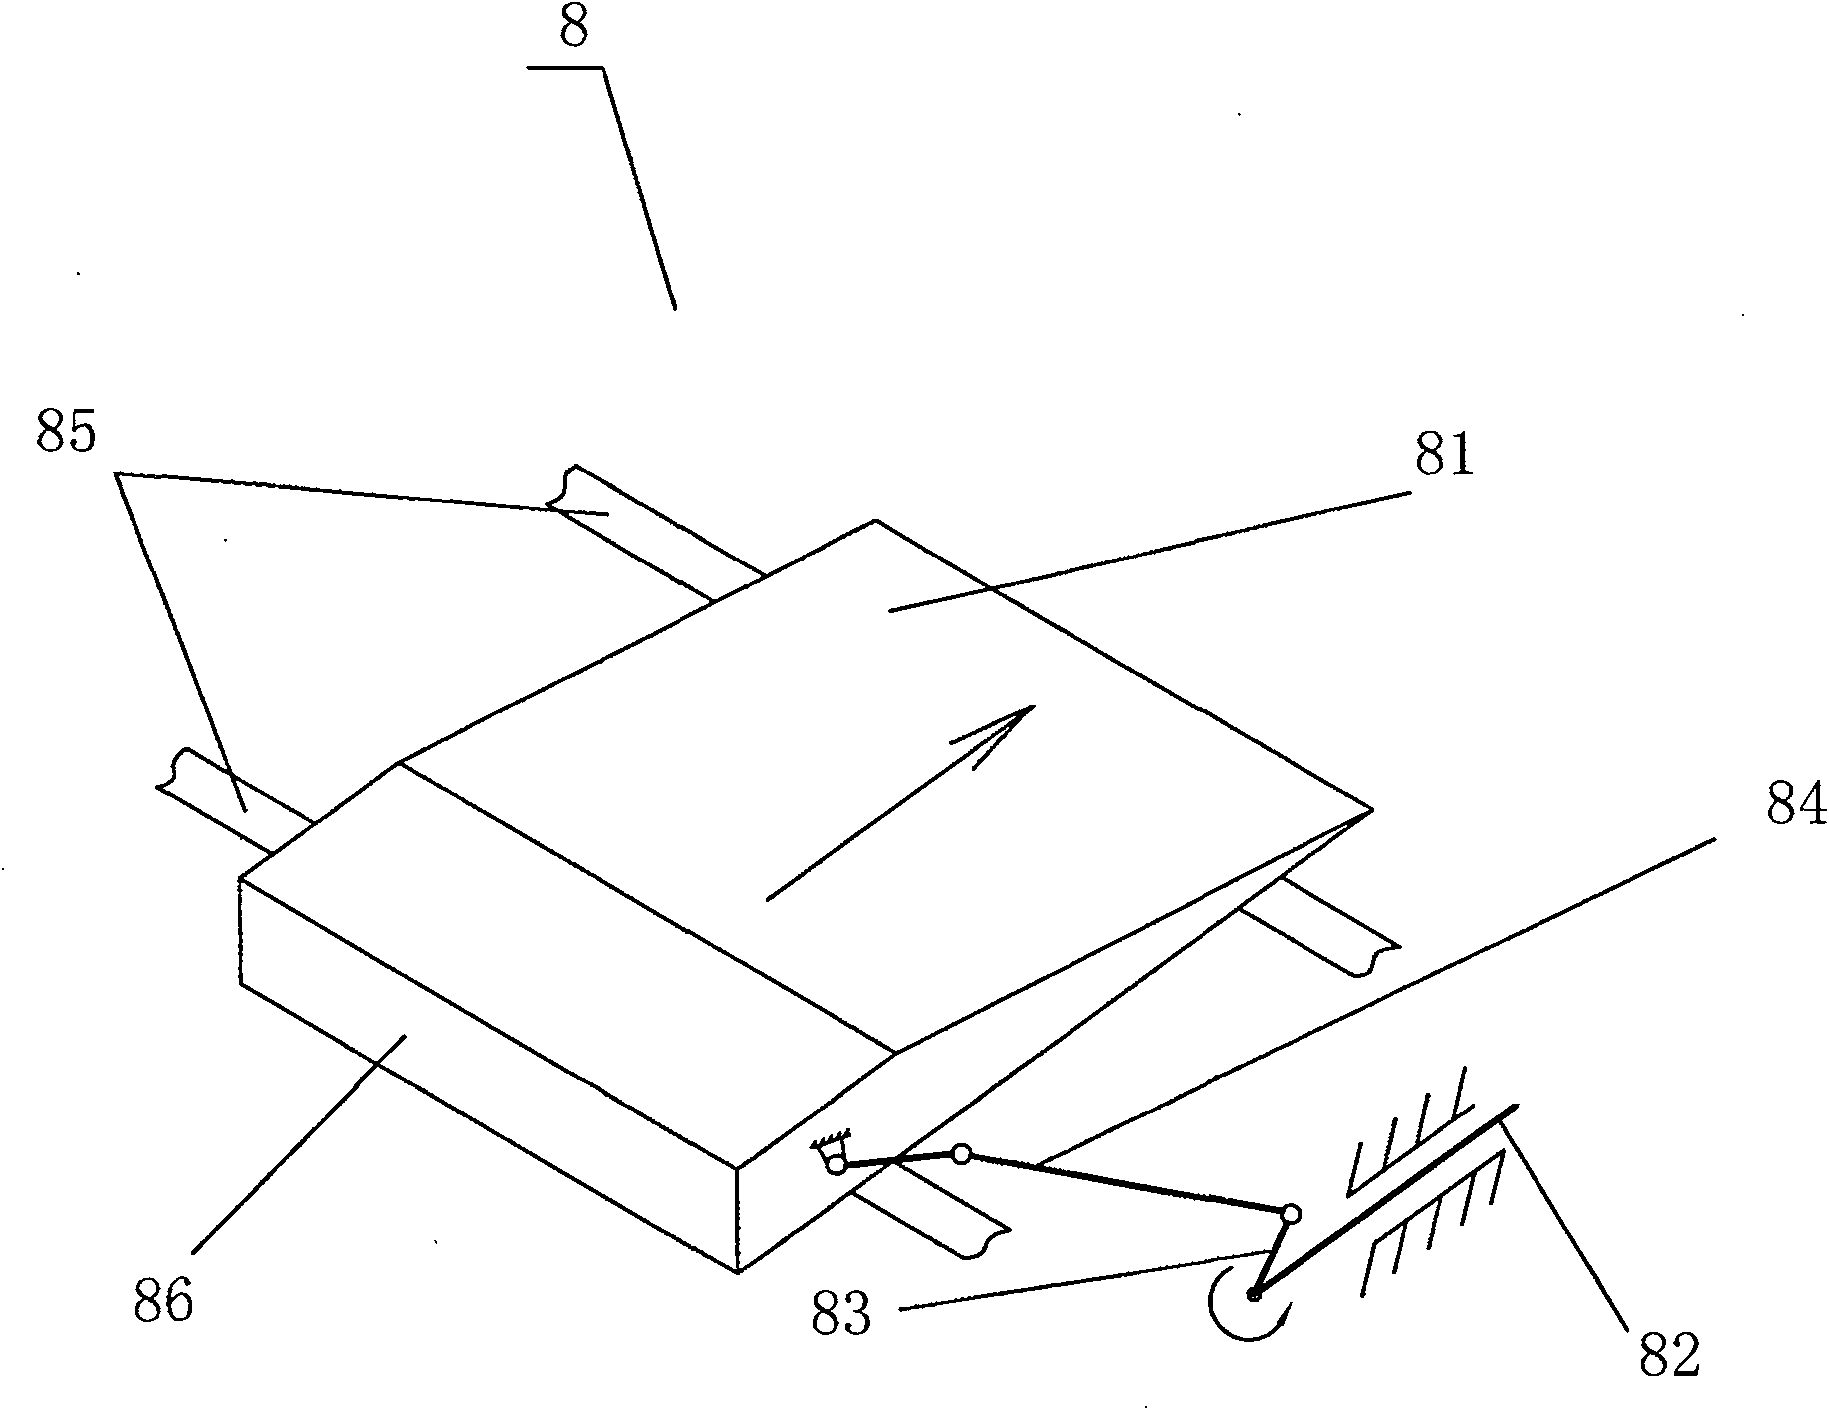 Continuously across shifting game equipment and method thereof